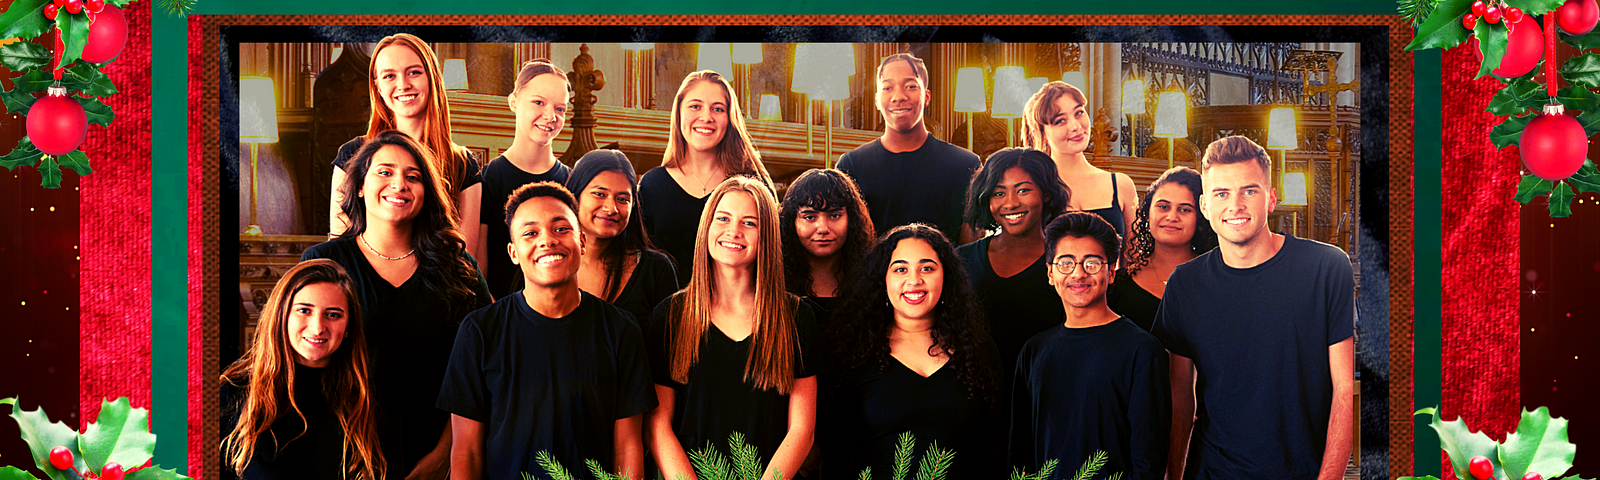 A choir of smiling diverse young adults surrounded by Christmas greenery